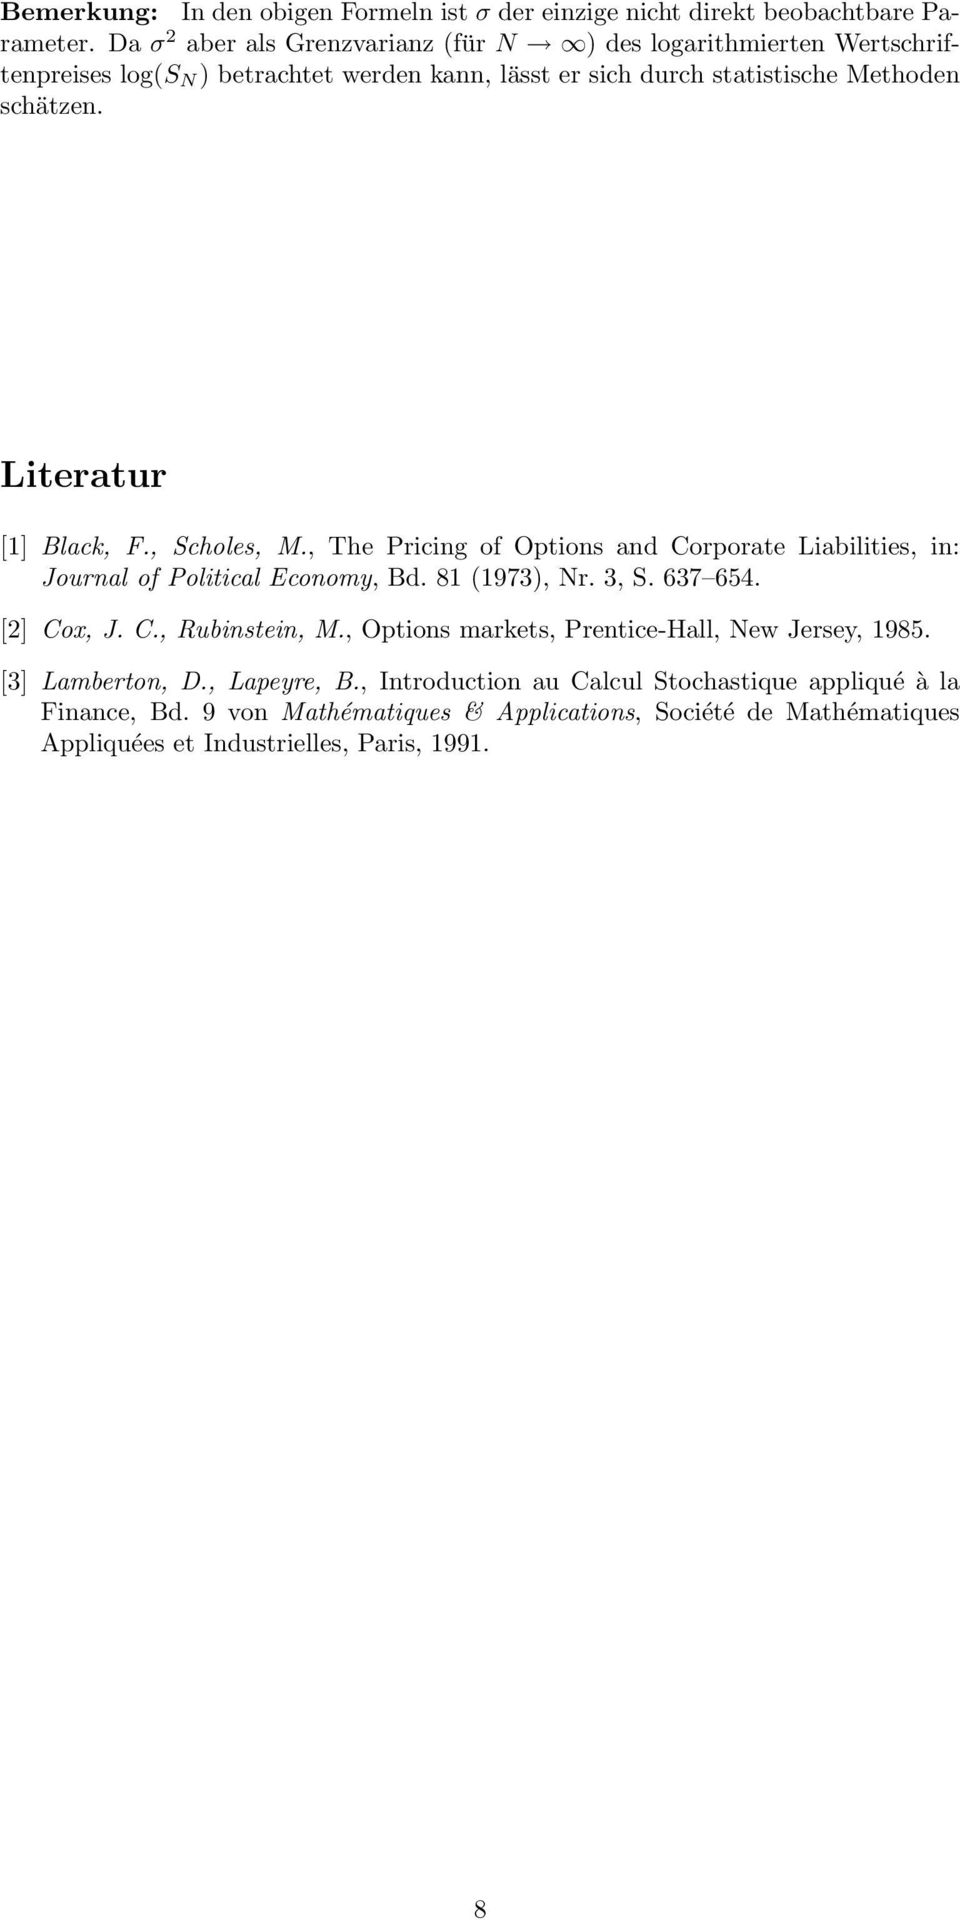 Literatur [] Black, F., Scholes, M., The Pricing of Options and Corporate Liabilities, in: Journal of Political Economy, Bd. 8 973, r. 3, S. 637 654. [] Cox, J. C., Rubinstein, M.